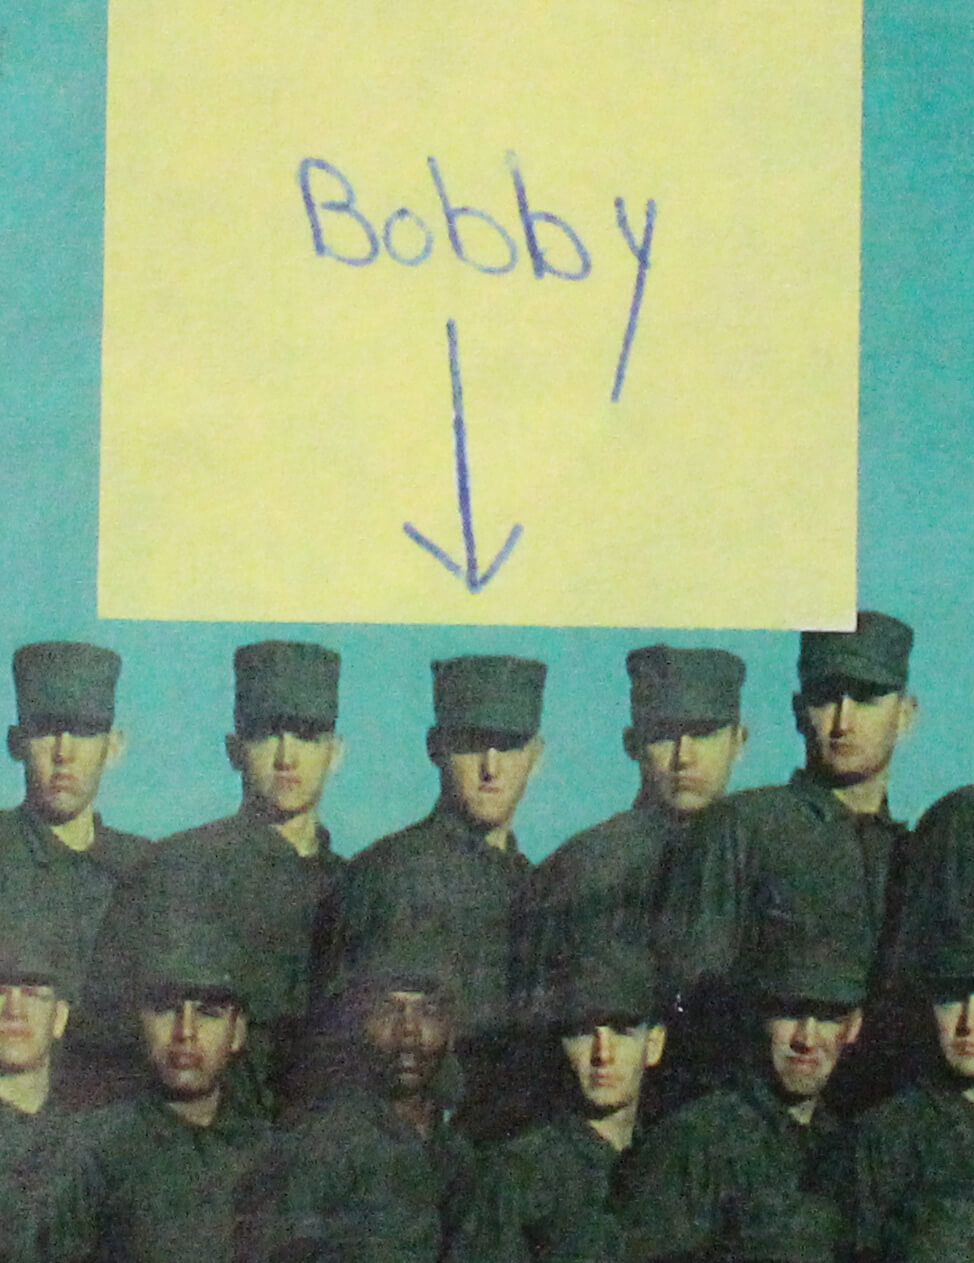 Portrait of a group of young soldiers with a note and arrow pointing to a soldier named Bobby.